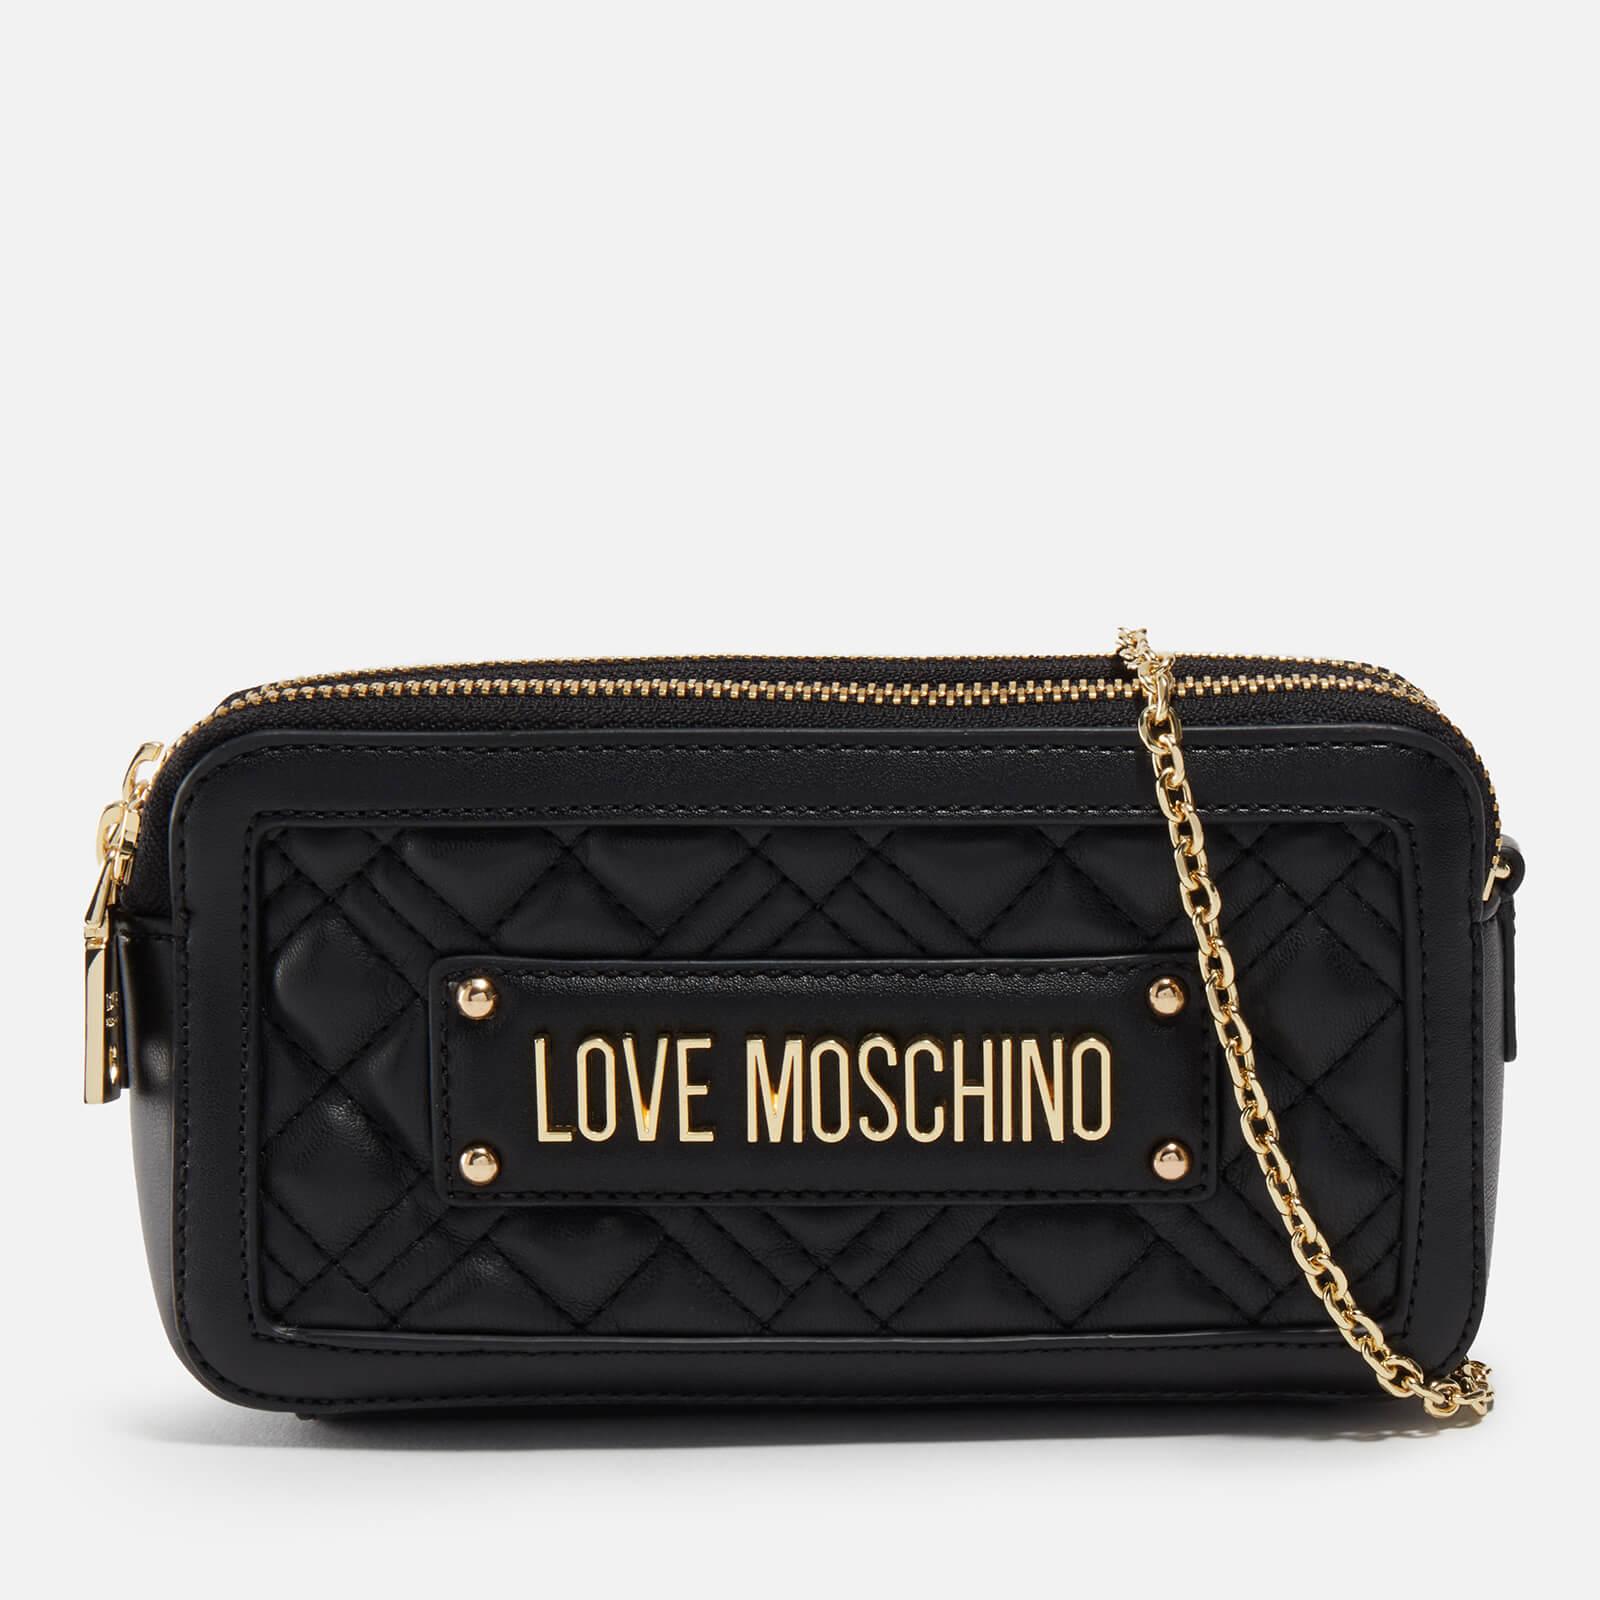 Love Moschino Portafoglio Quilted Faux Leather Wallet in Black | Lyst